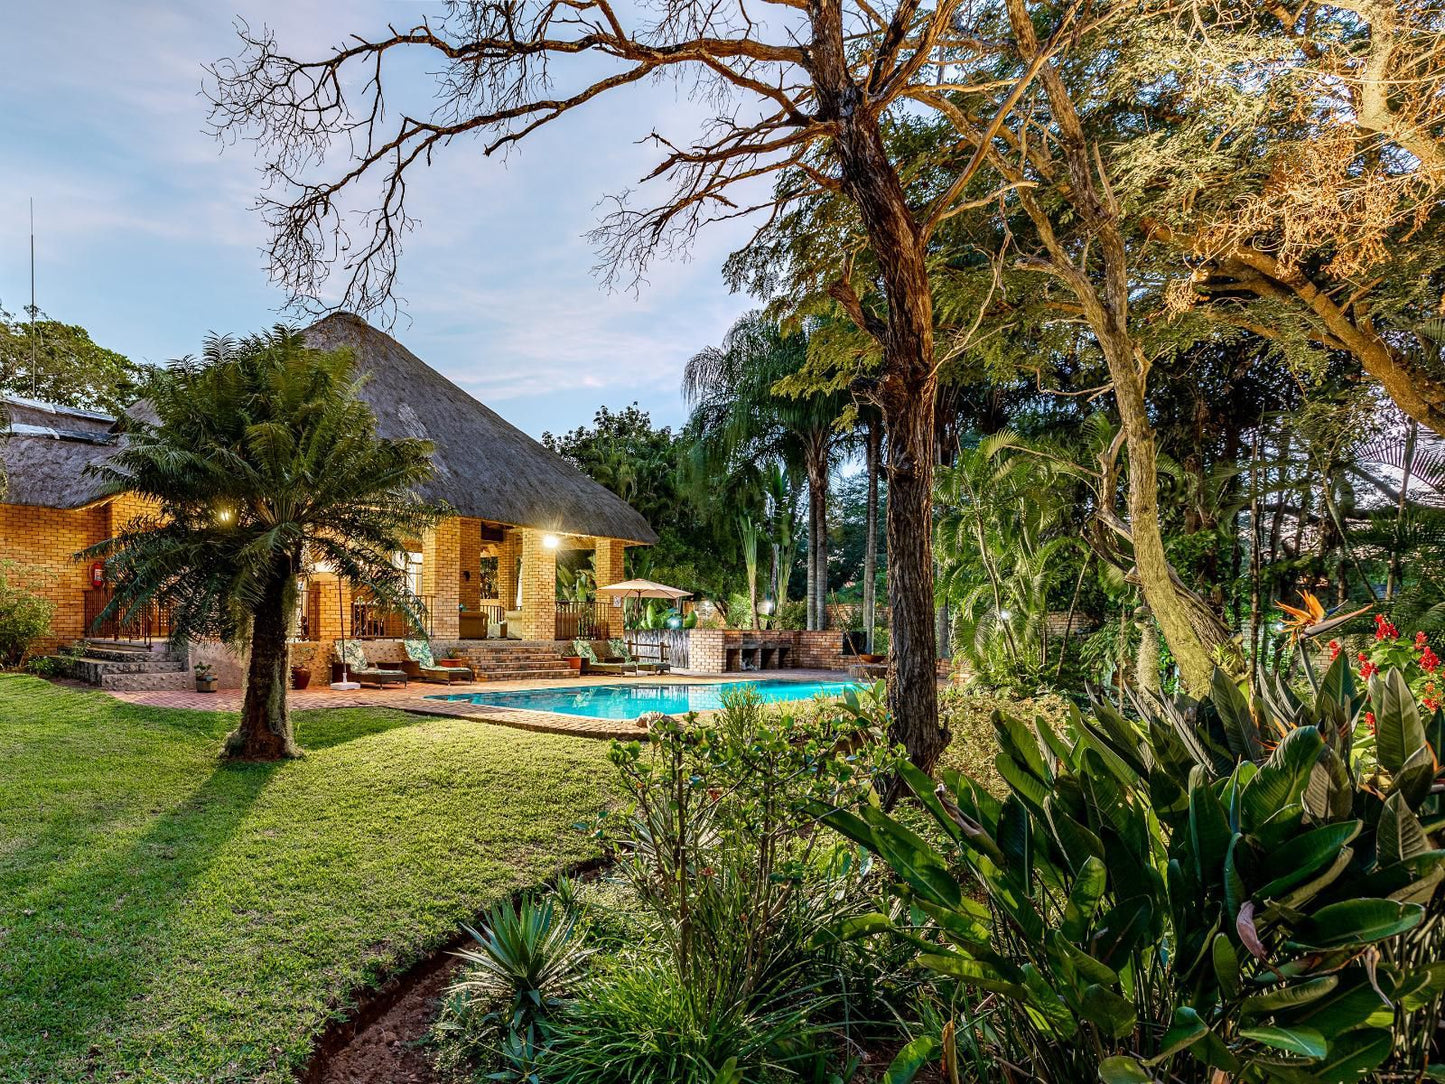 Dreamfields Guesthouse Hazyview Mpumalanga South Africa House, Building, Architecture, Palm Tree, Plant, Nature, Wood